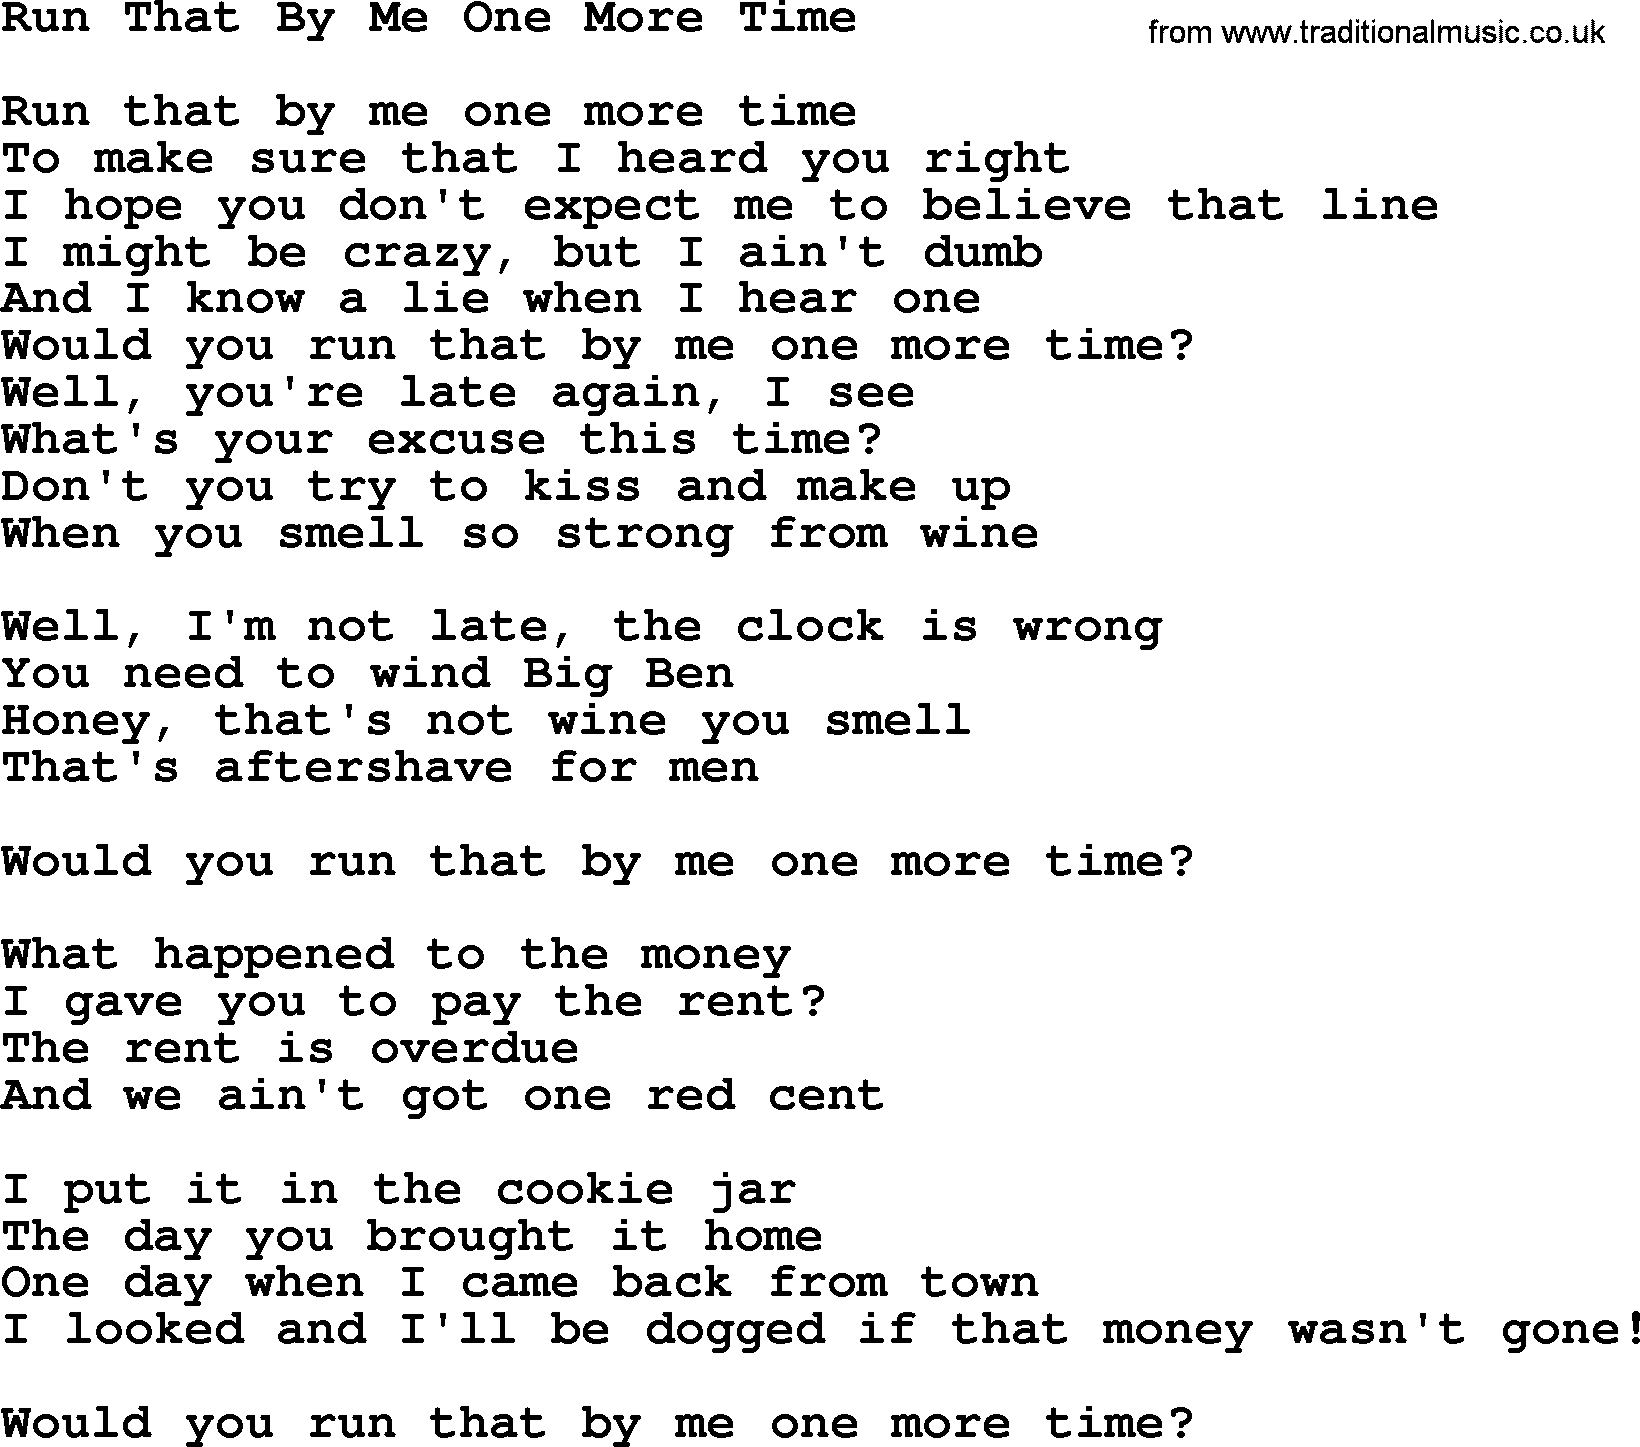 Dolly Parton song Run That By Me One More Time.txt lyrics